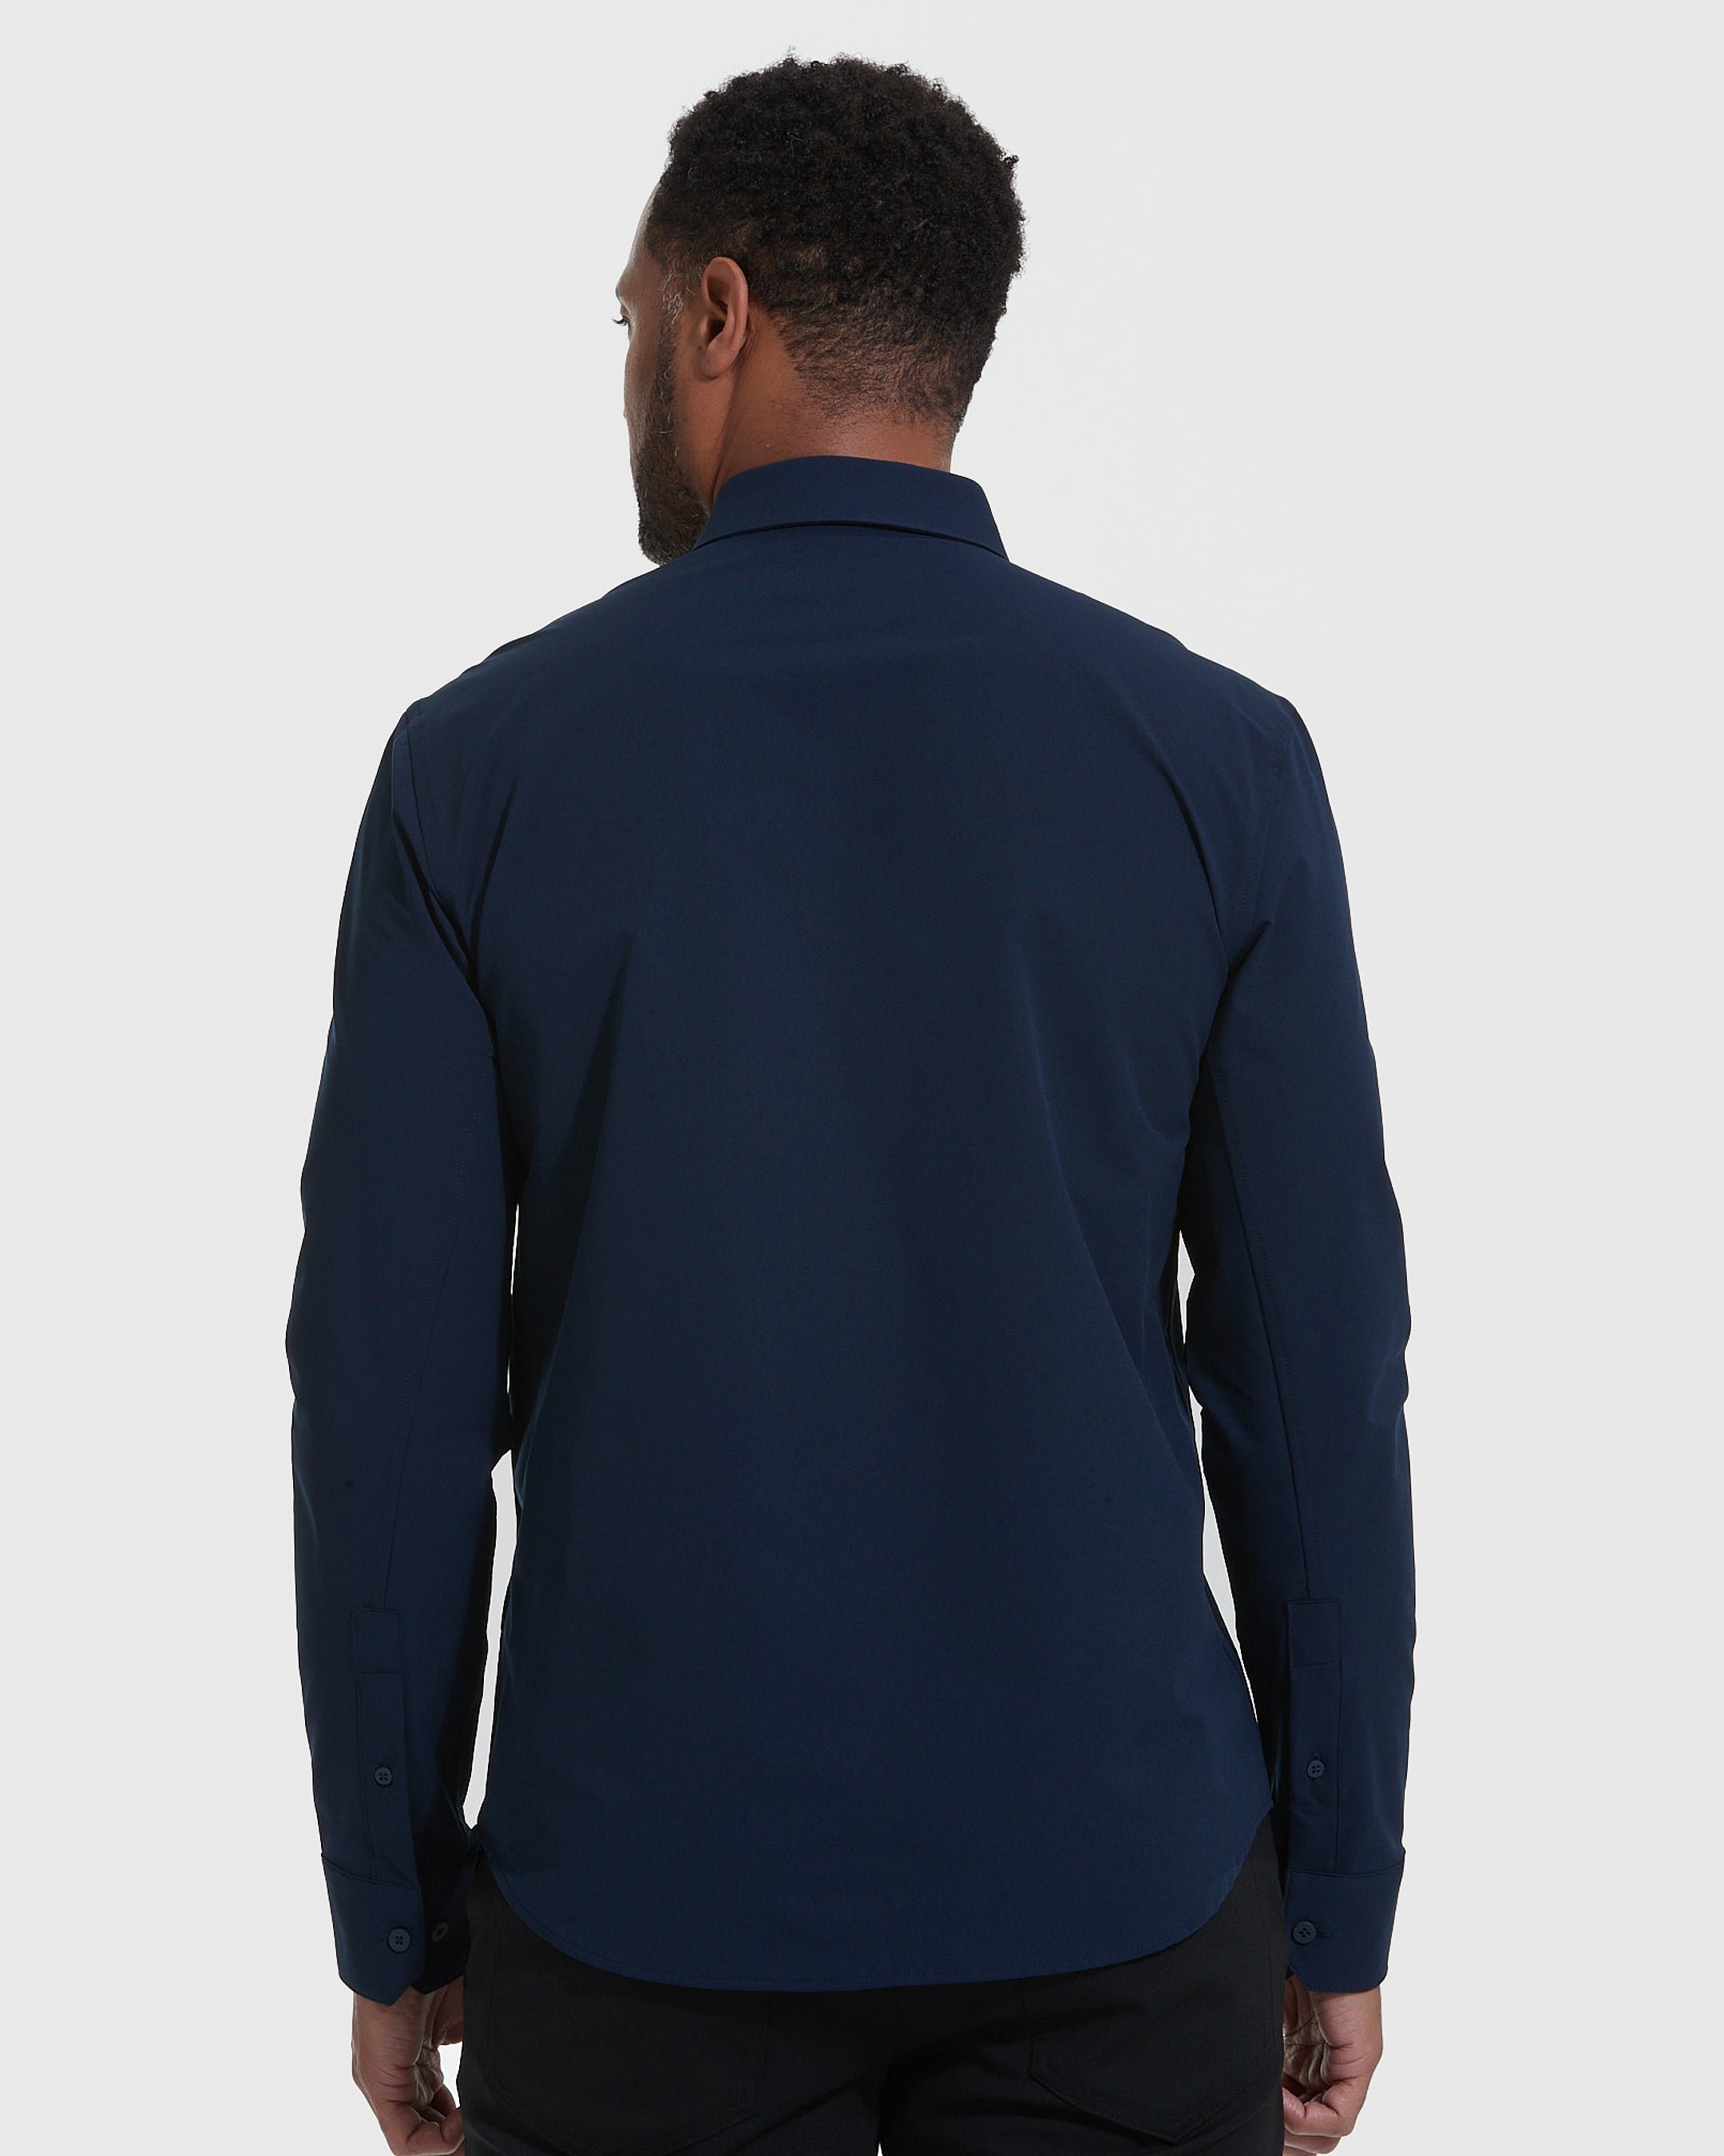 Navy and White Commuter Long Sleeve Button Up 2-Pack